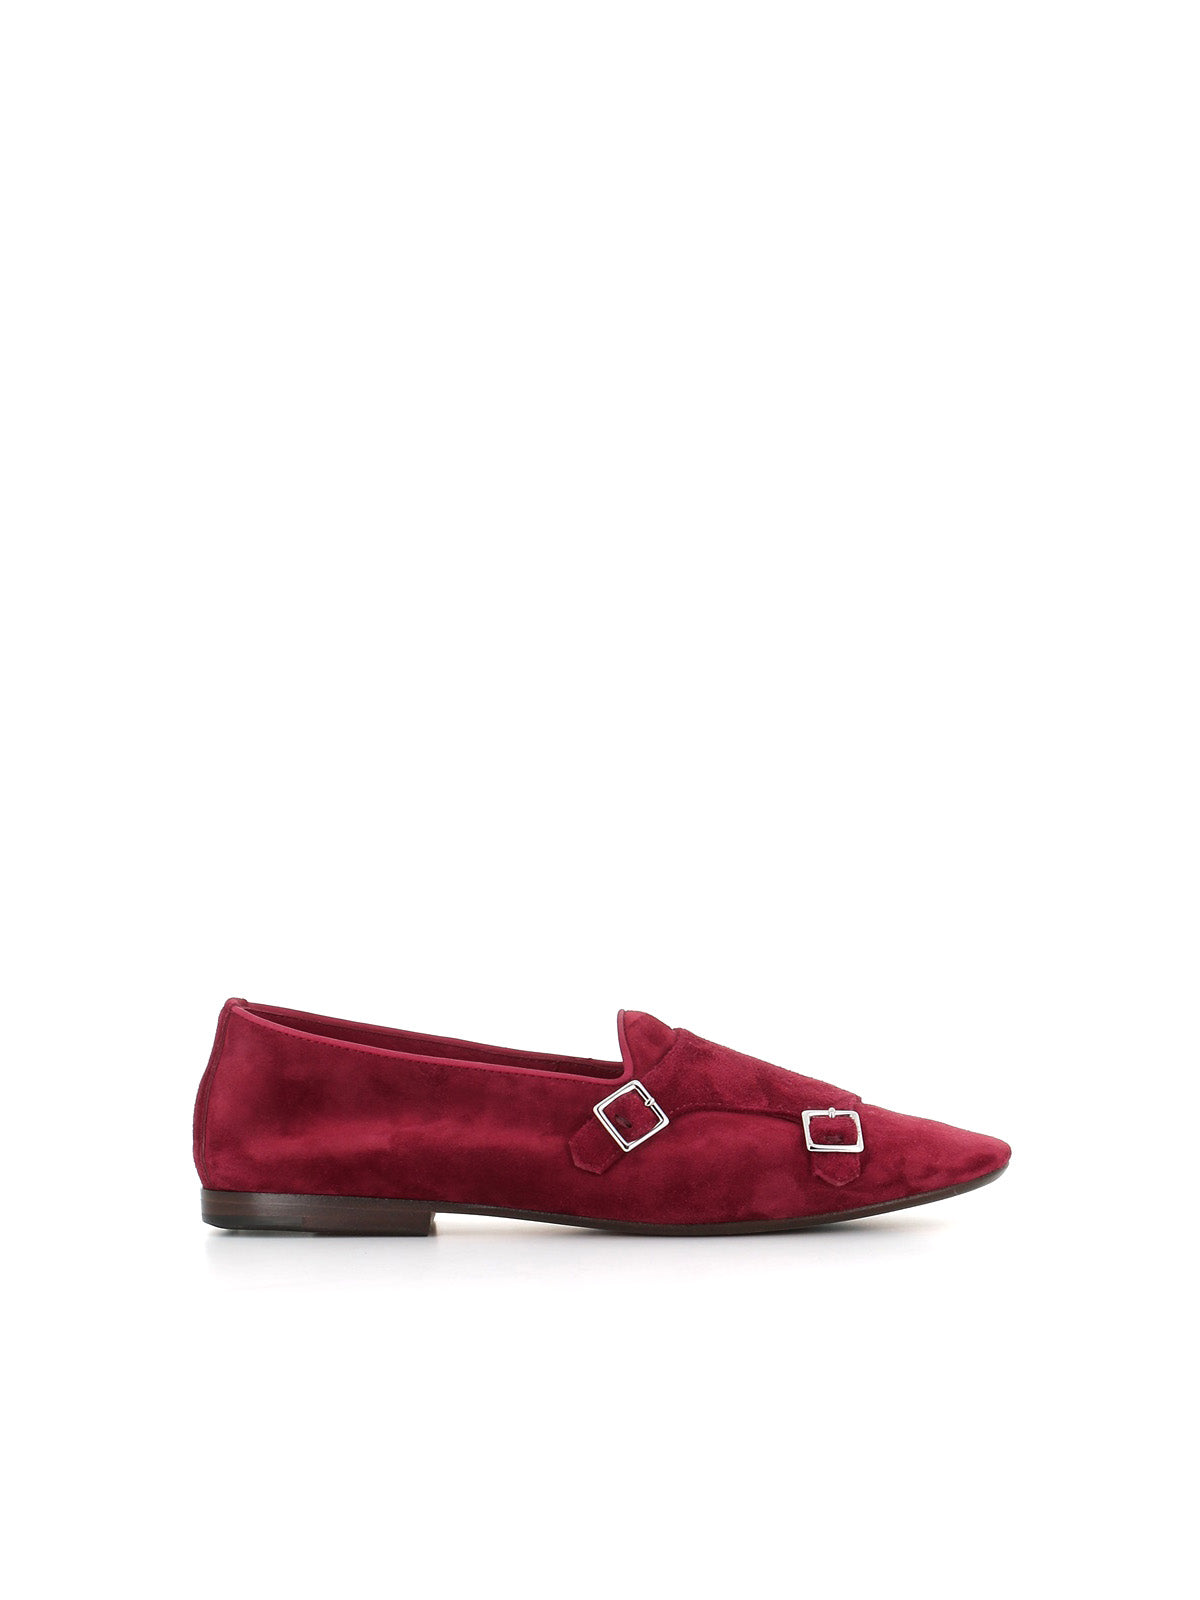  Buckle May.c.13 Henderson Baracco Donna Rosso - 1